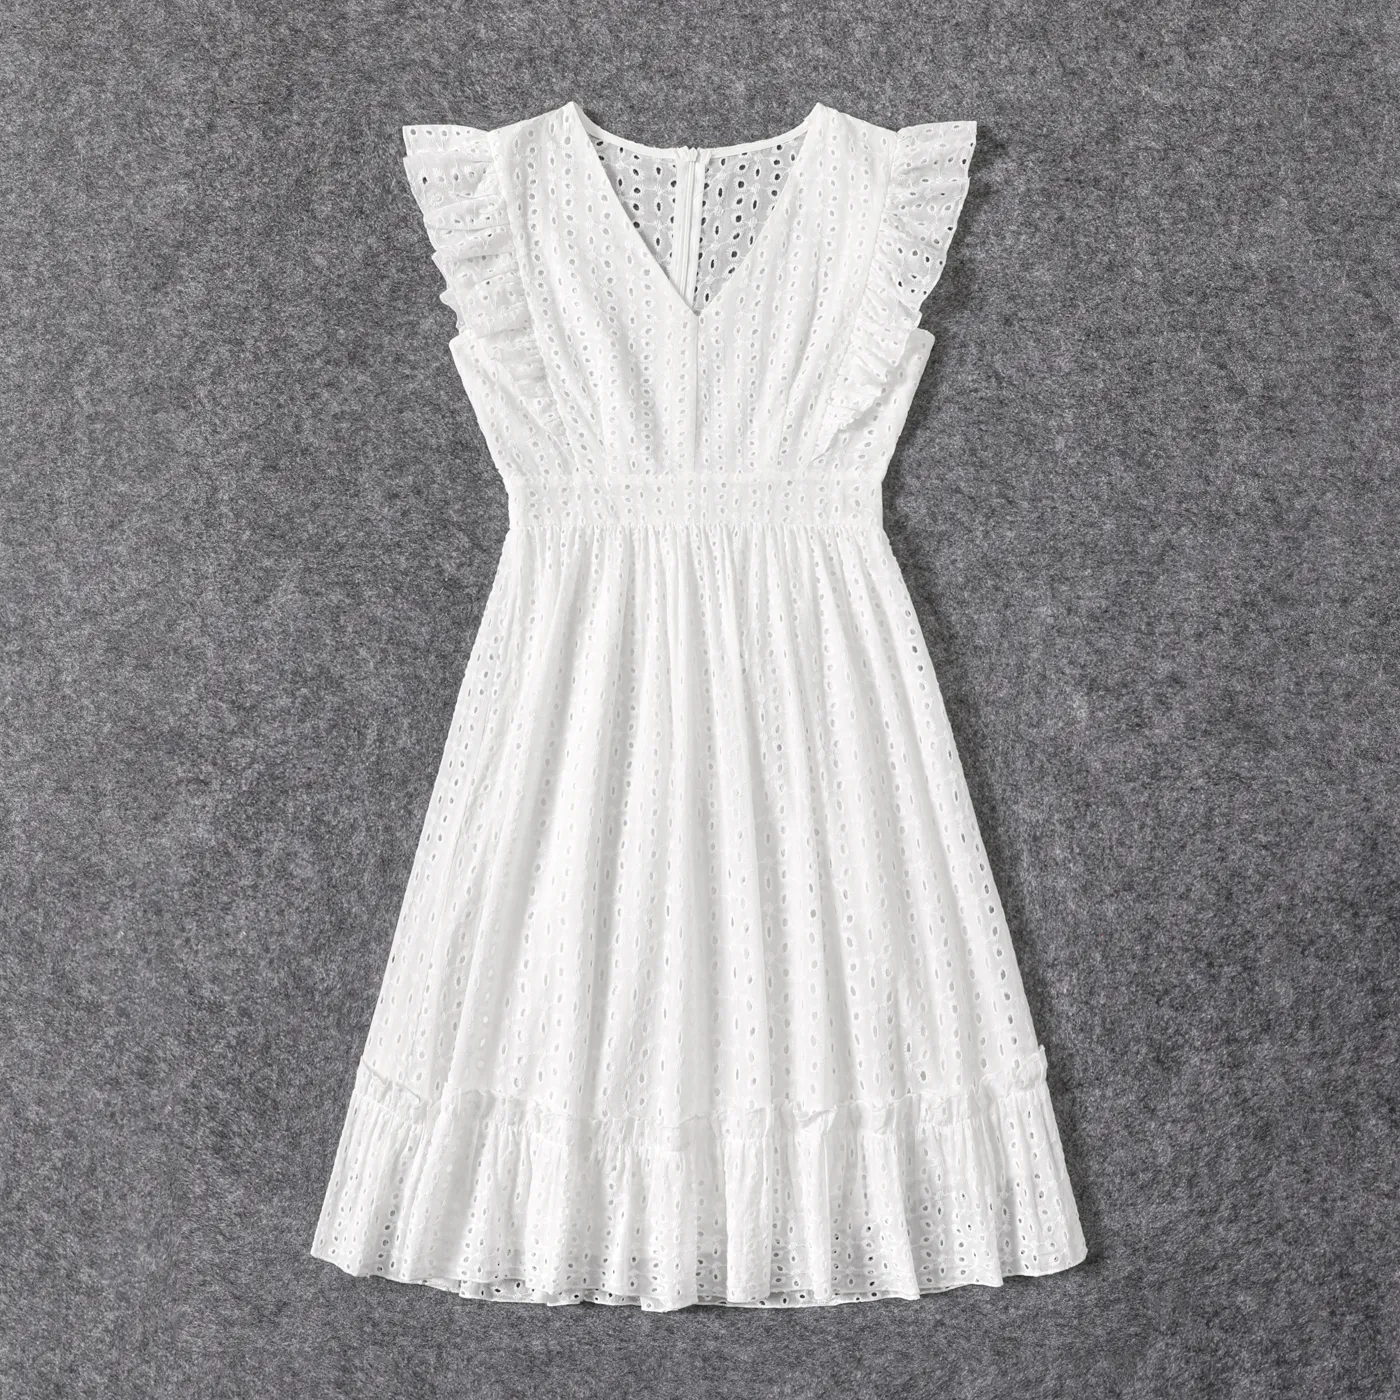 100% Cotton White Hollow-Out Floral Embroidered Ruffle Sleeveless Dress For Mom And Me